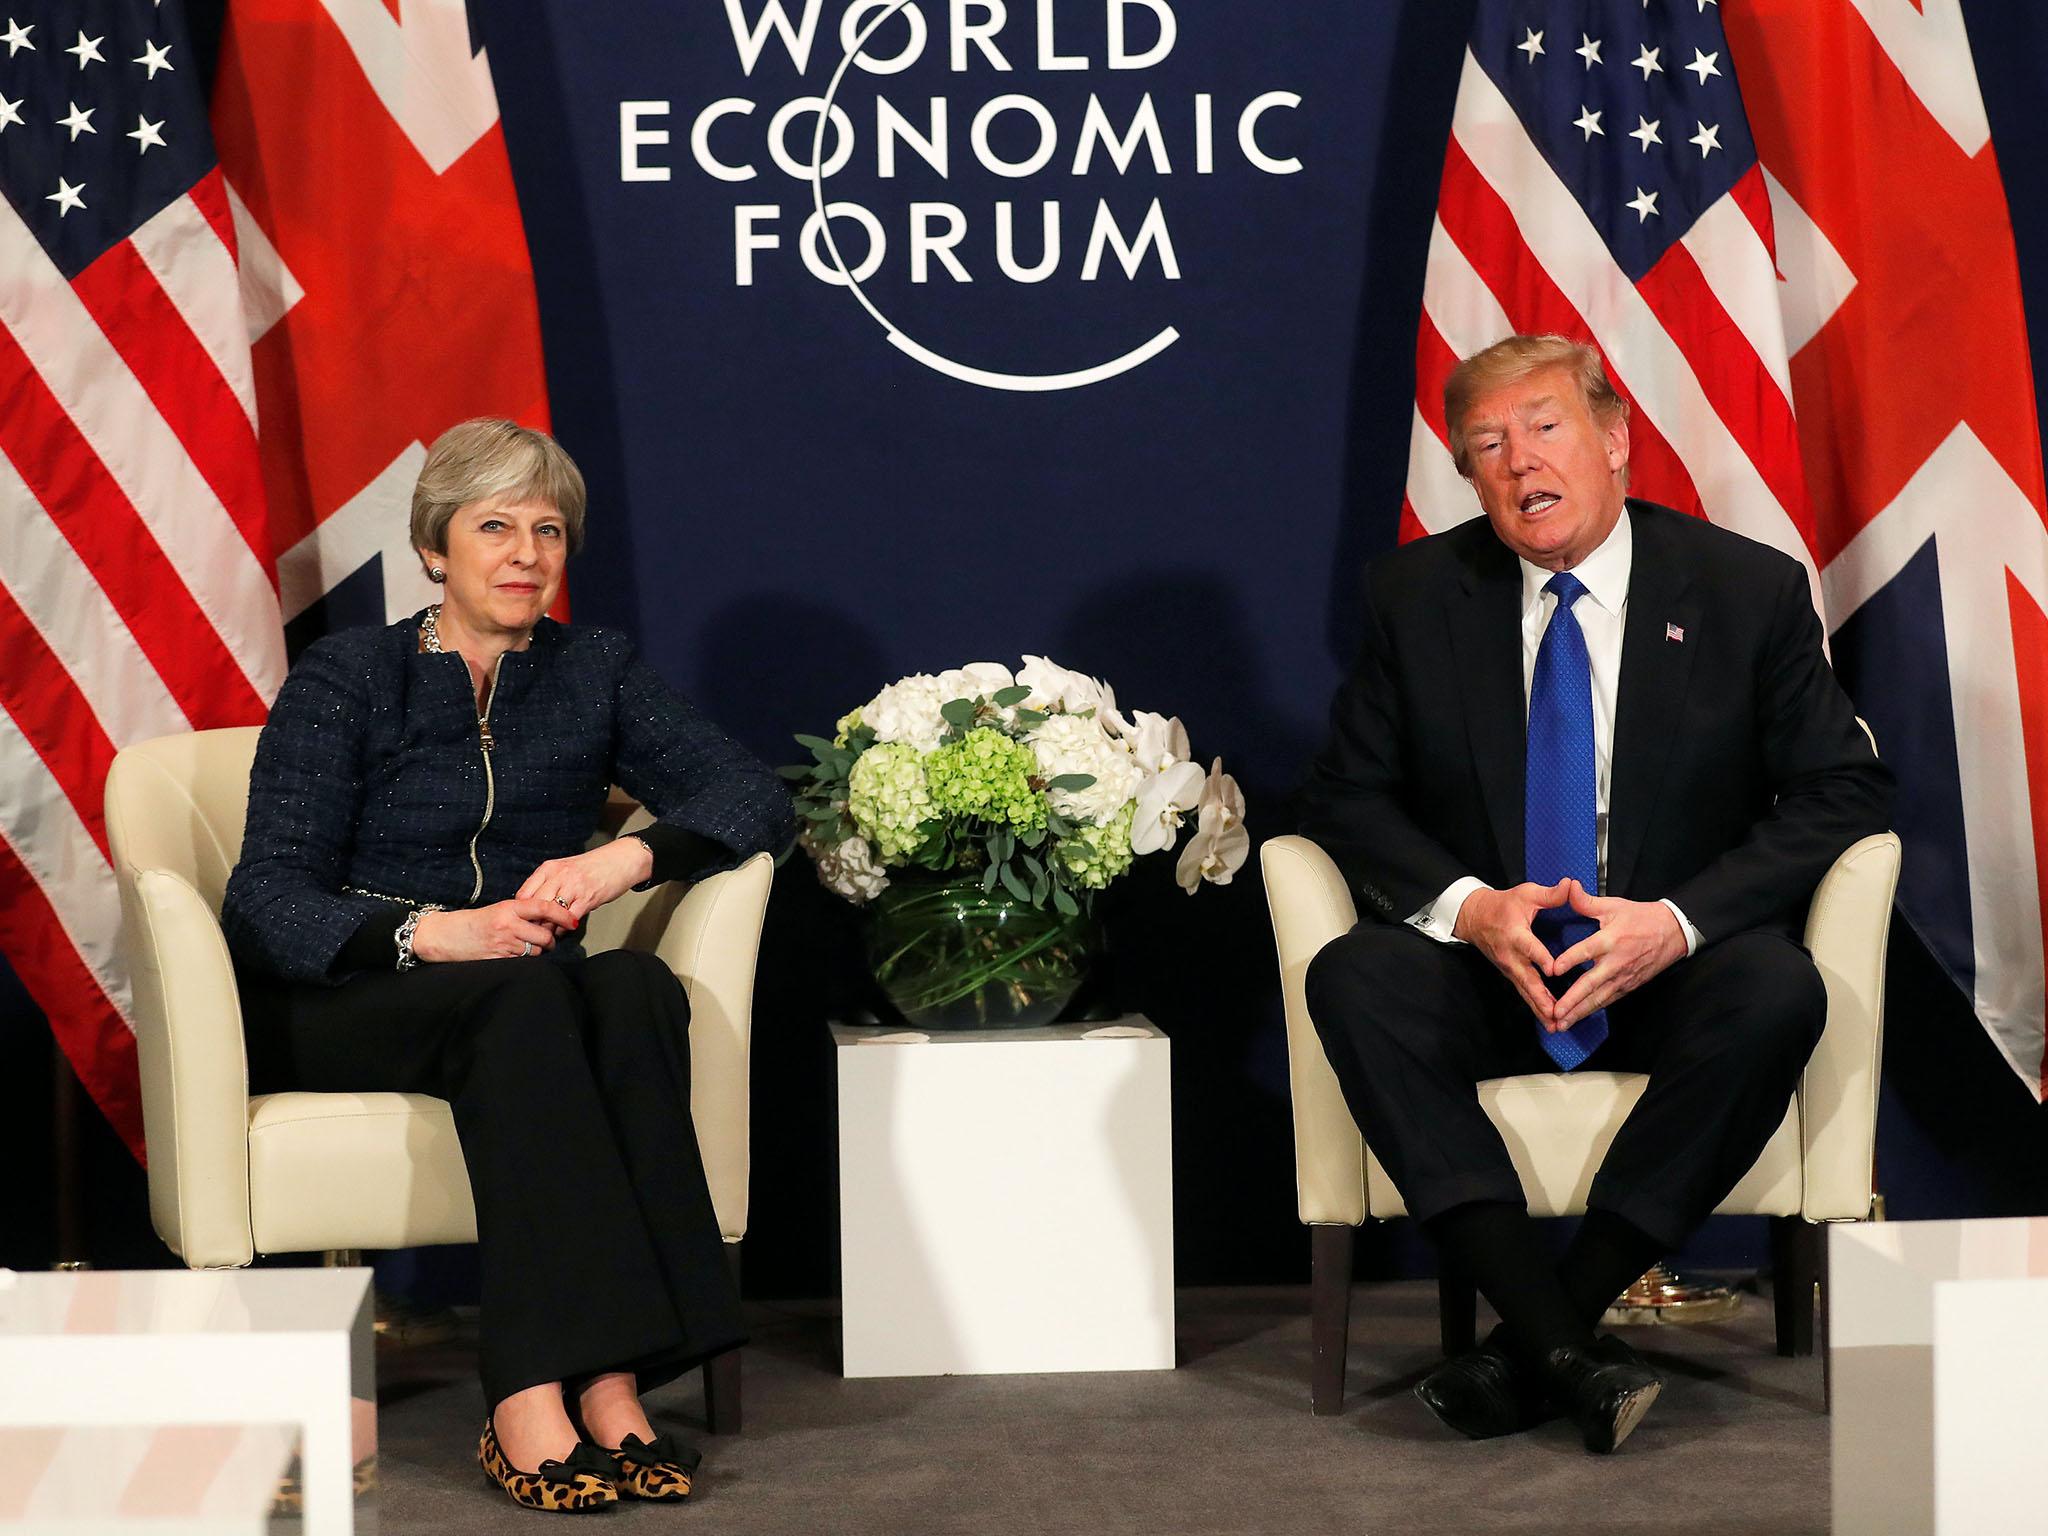 Theresa May and Donald Trump in Davos at the World Economic Forum